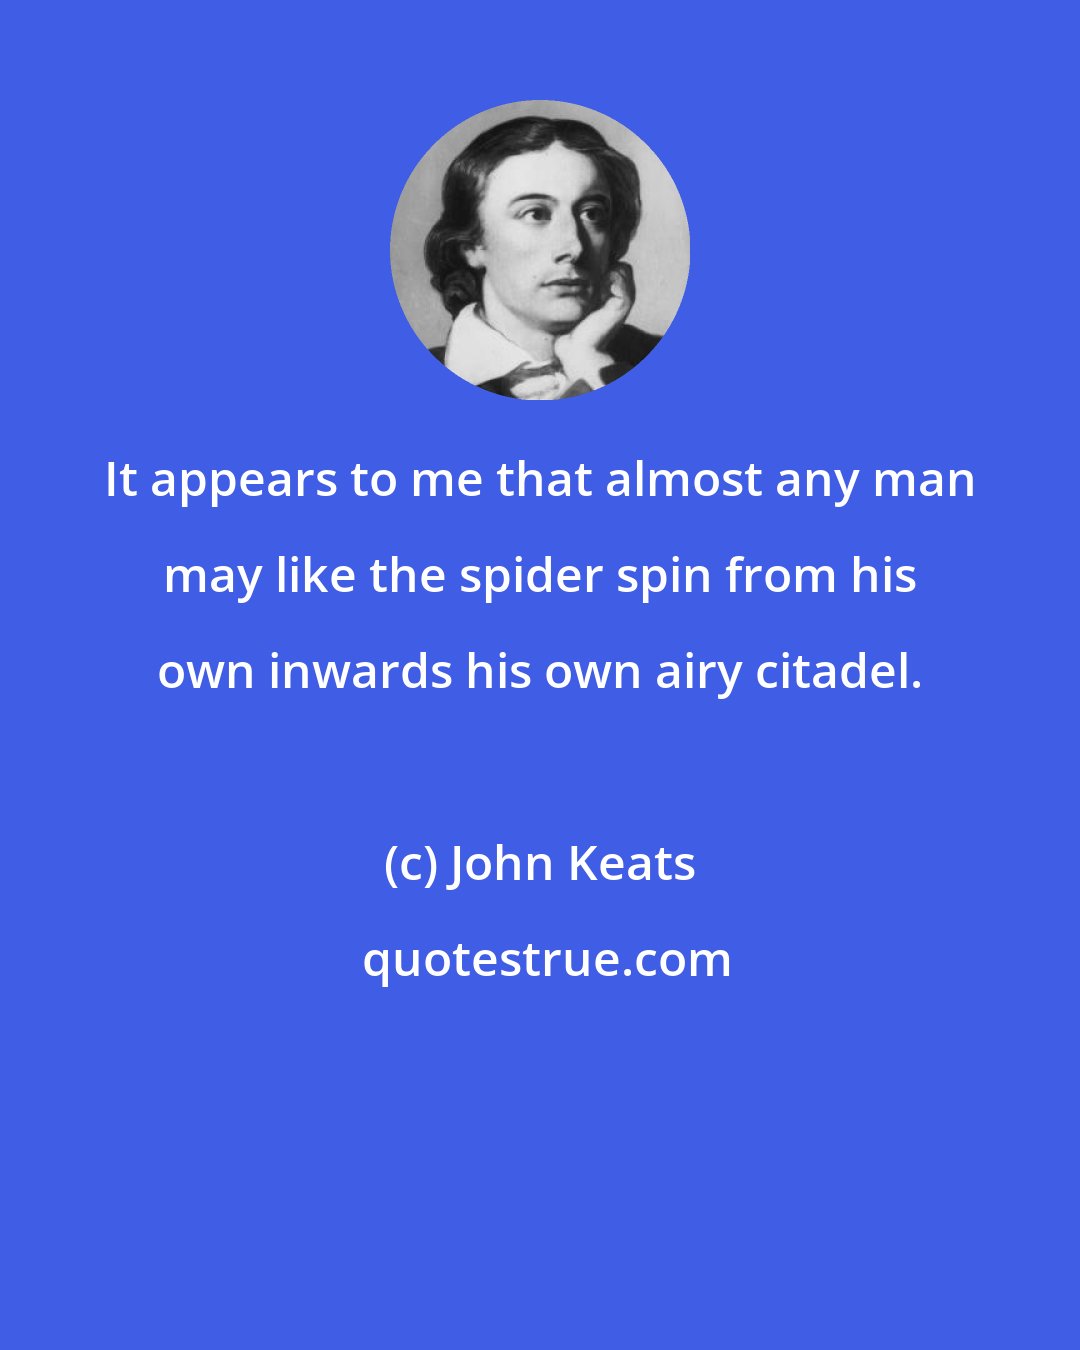 John Keats: It appears to me that almost any man may like the spider spin from his own inwards his own airy citadel.